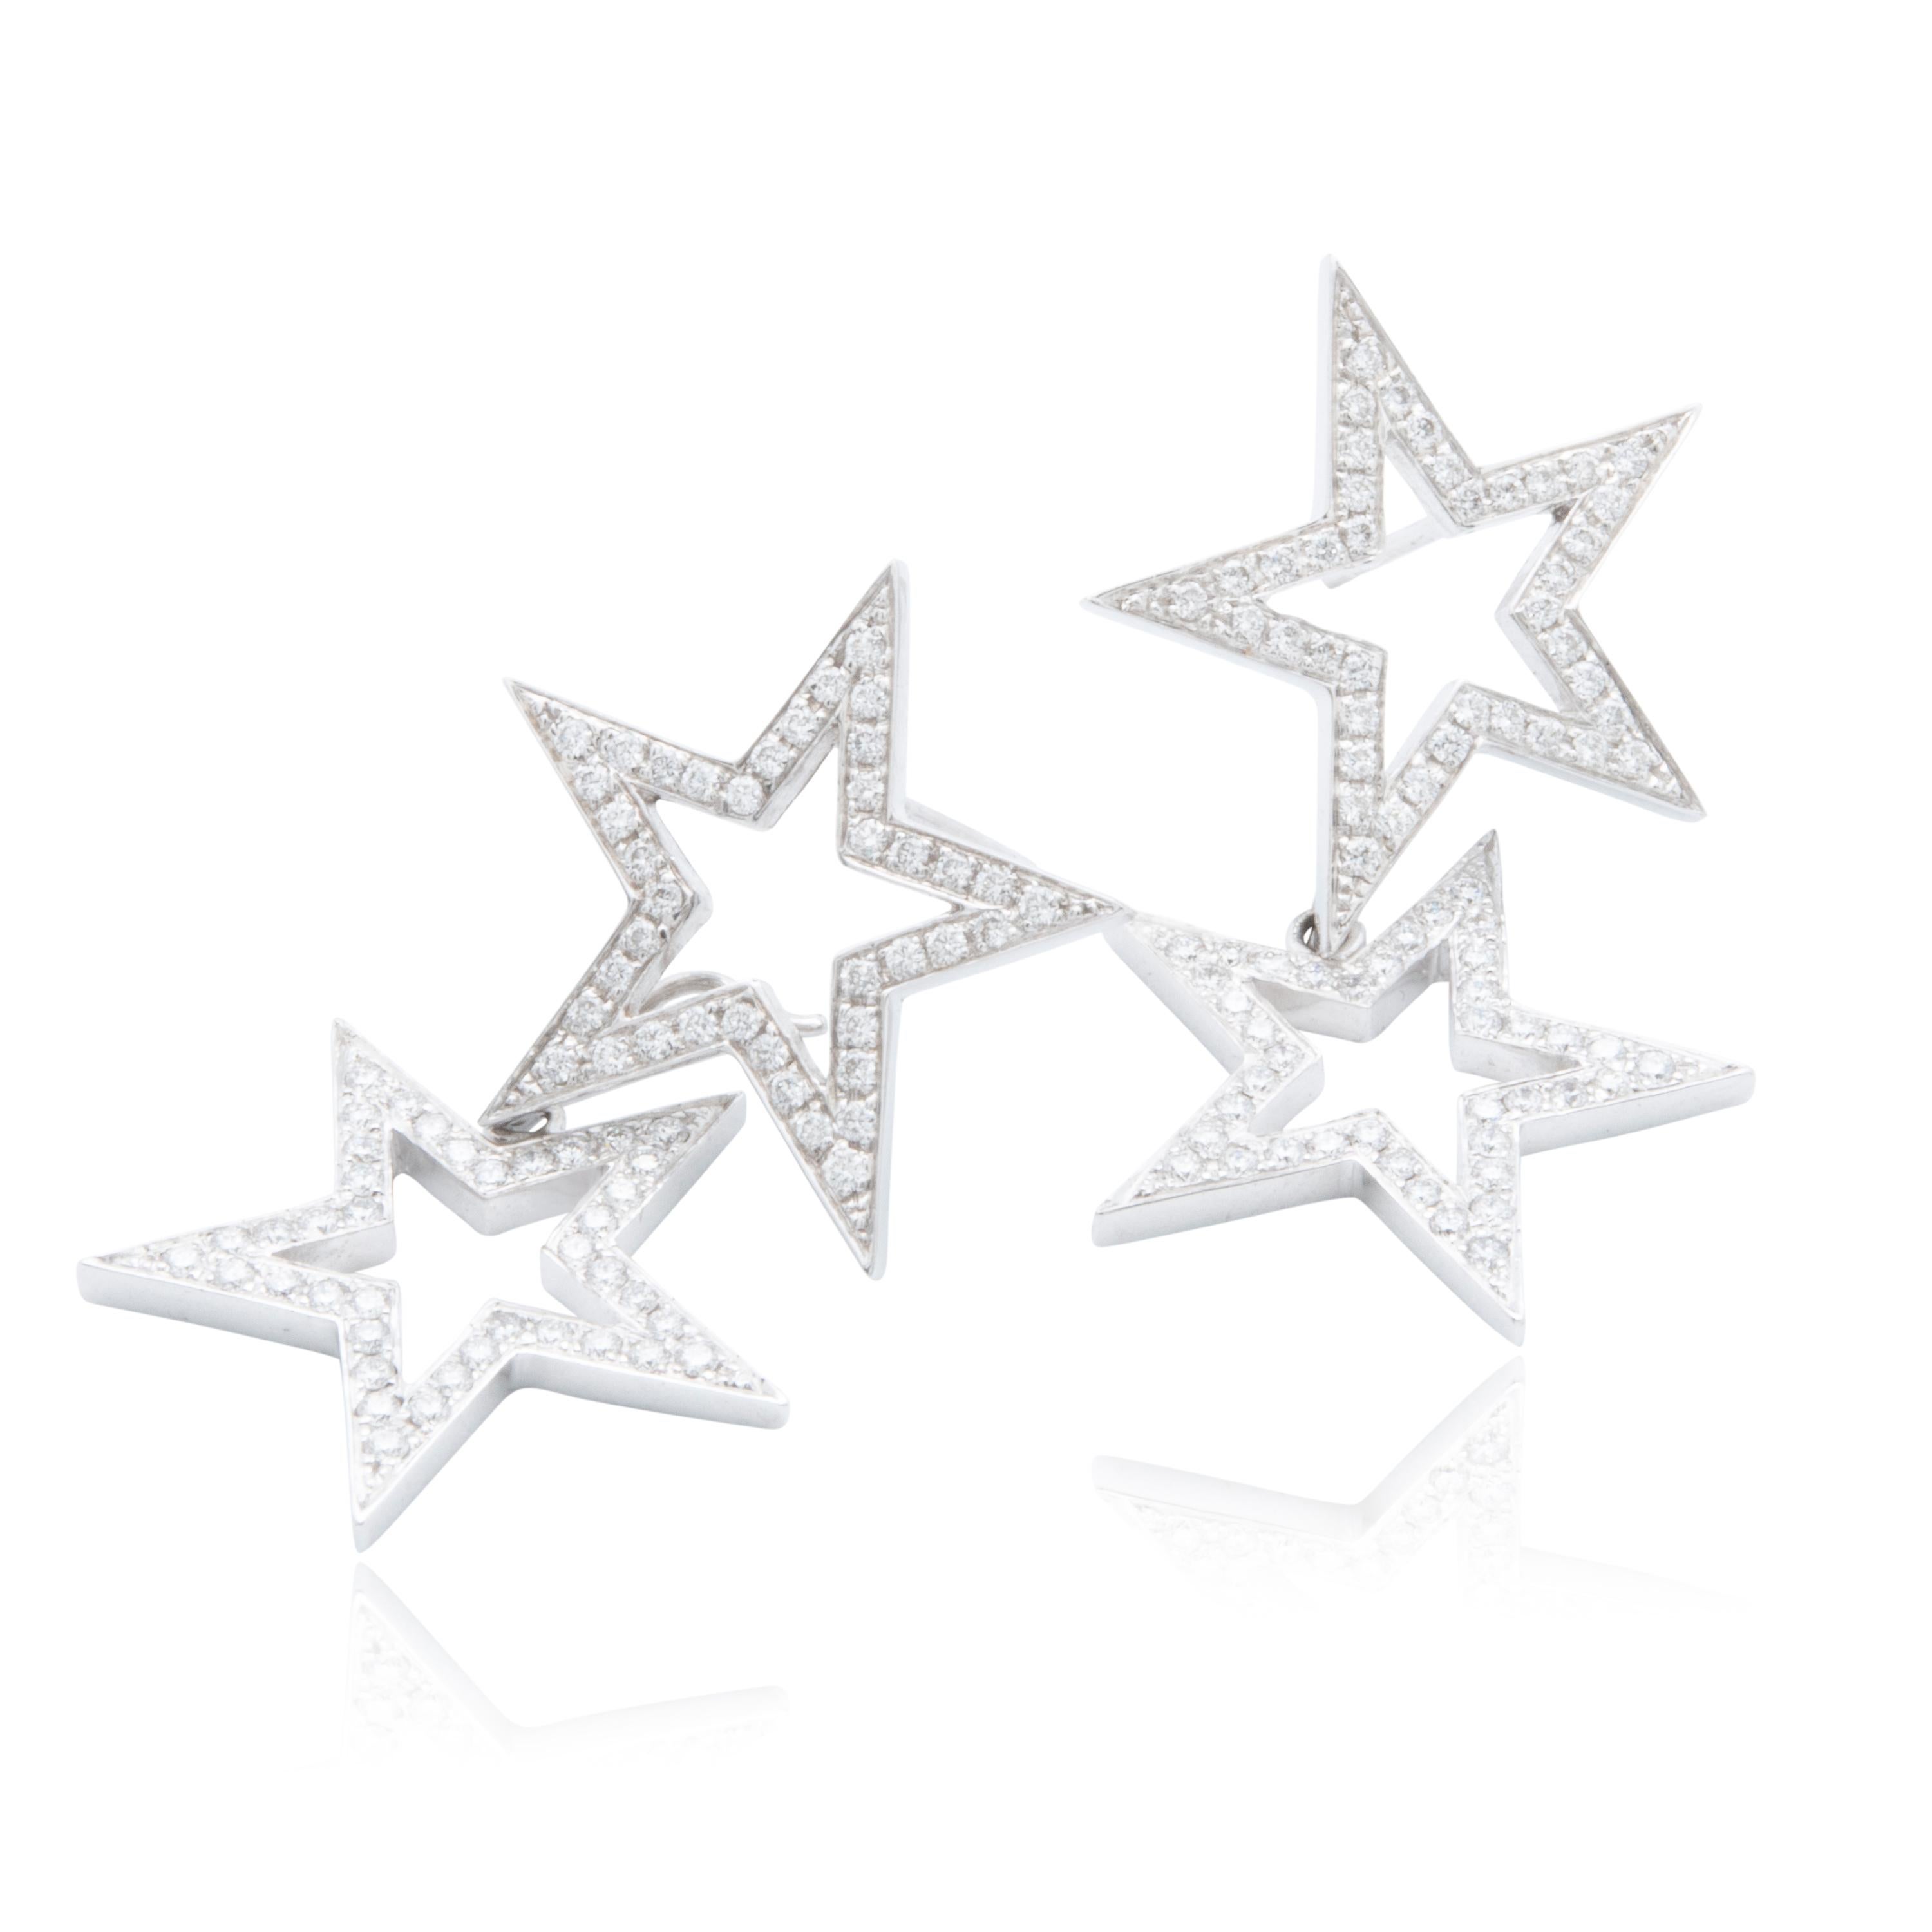 Collection: Classy Classics

Title: “The Ziggy Star Dust” Earrings

This is one of the Classy Classics offered by An Order of Bling. A piece that we believe will take you from day to night.  Wear them as studs or as dangle stars and channel your